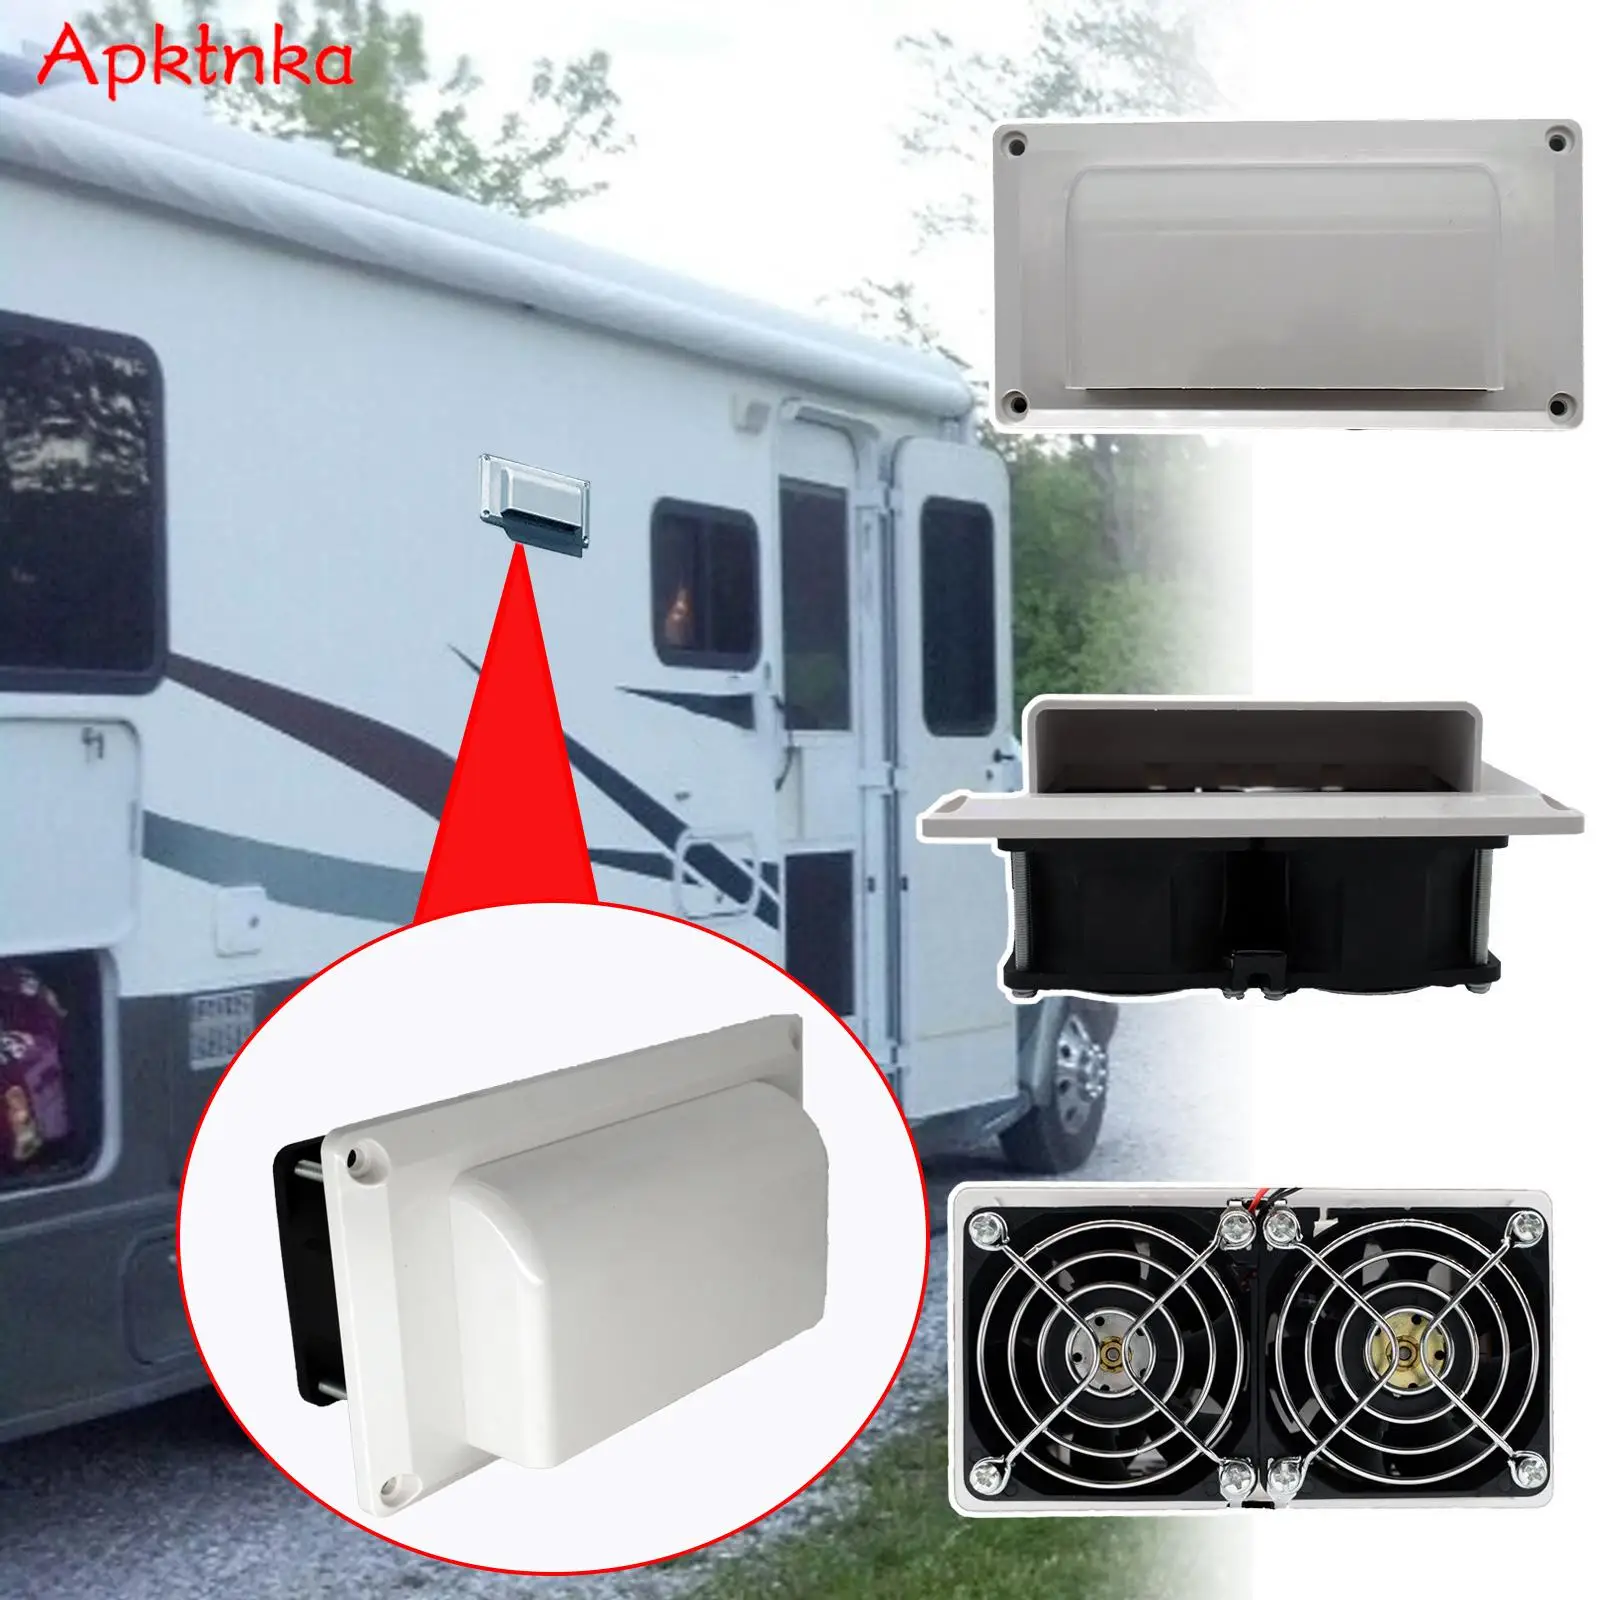 

RV White Side Air Vent Exhaust Fan Blower Cooling Ventilation For Caravan Motorhome Boat Universal DC 12V 25W Quiet Camp Travel